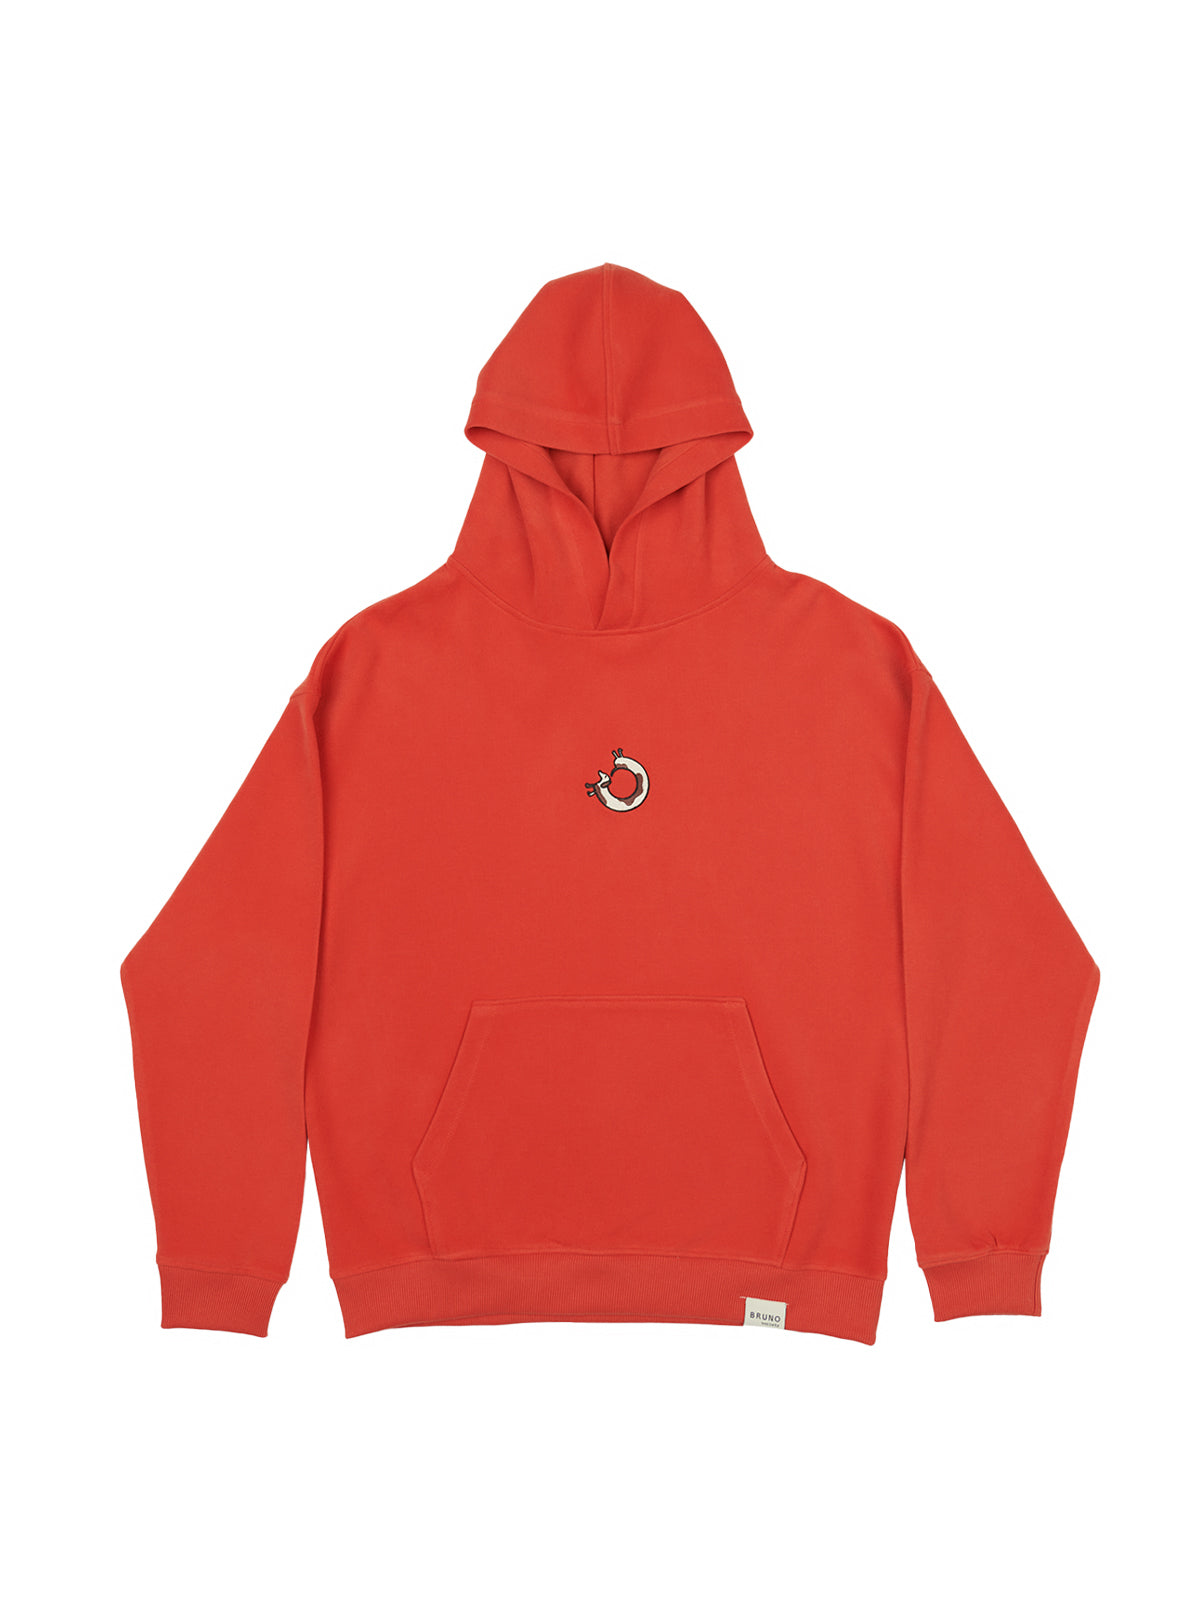 Matching Hoodie - Red